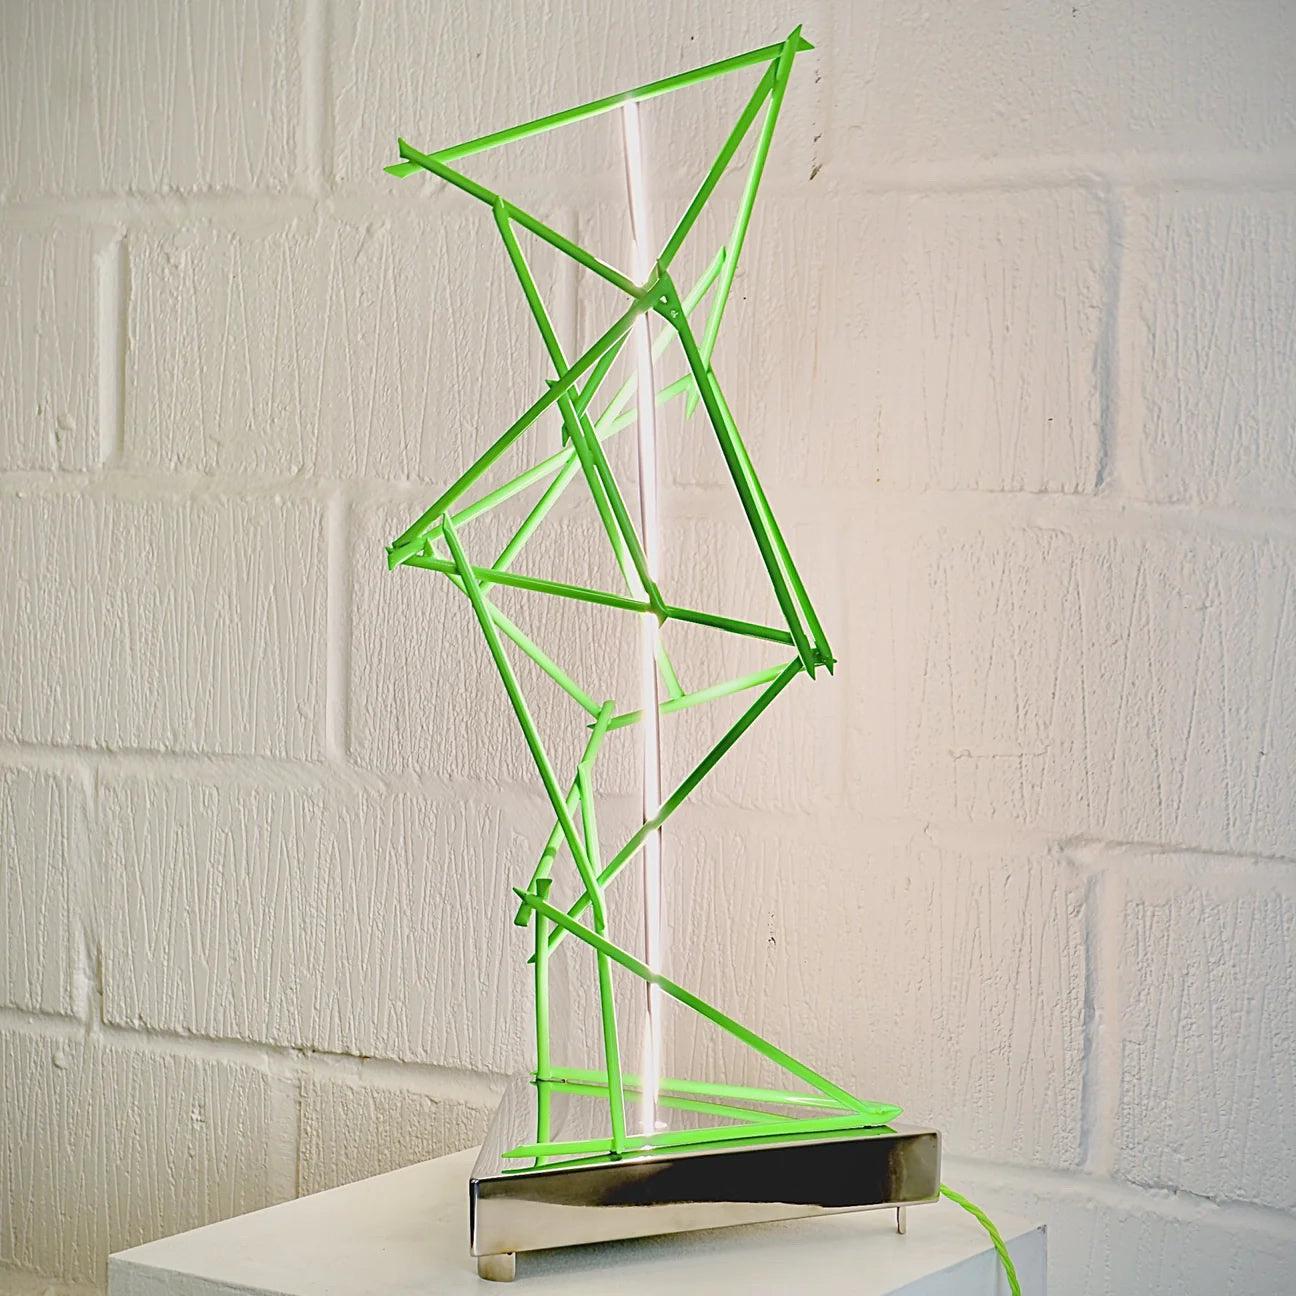 Mark Beattie, Green Fracture, 2023

Powder coated copper & dimmable LED light on mirror polished stainless steel plinth

Edition of 3 

35 x 35 x 86 cm (13.77 x 13.77 x 33.85 in)